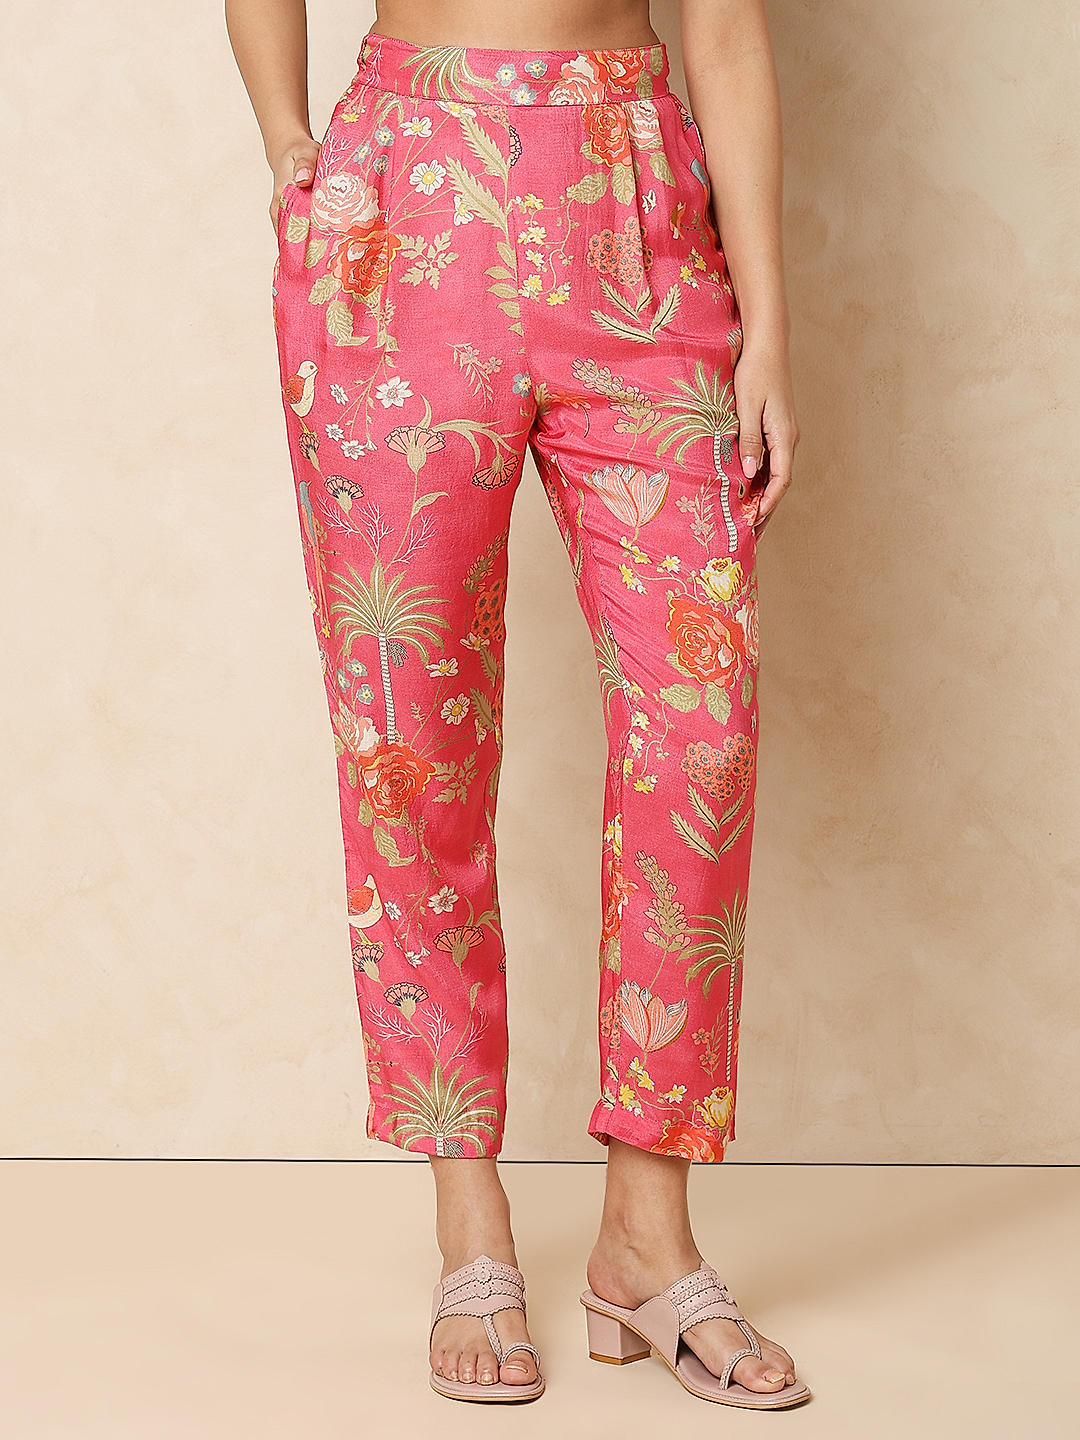 Floral Print Wide Leg Trousers and Hot Pink Jacket + Style With a Smile  Link Up - Style Splash